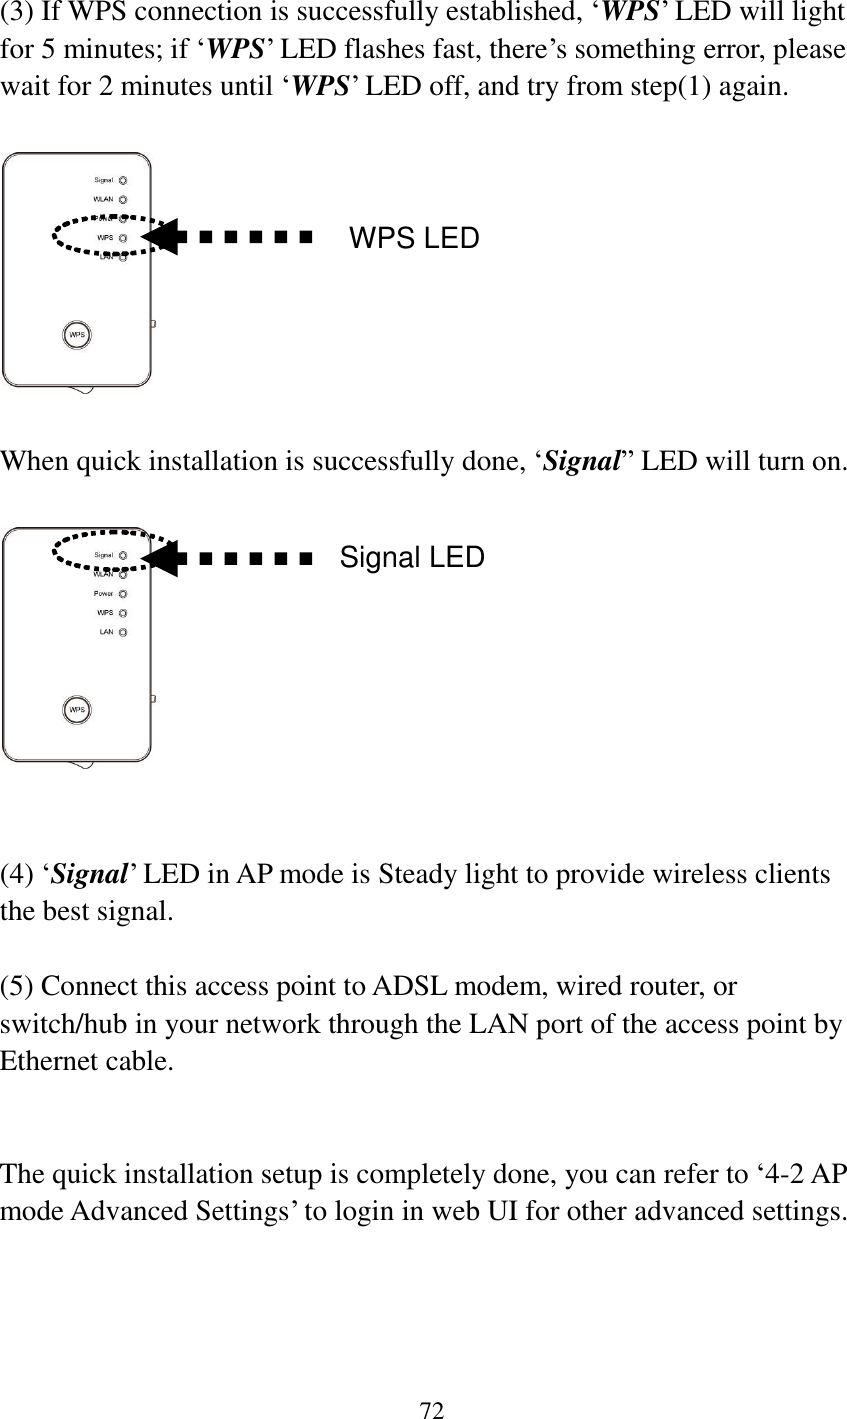 72   (3) If WPS connection is successfully established, „WPS‟ LED will light for 5 minutes; if „WPS‟ LED flashes fast, there‟s something error, please wait for 2 minutes until „WPS‟ LED off, and try from step(1) again.      When quick installation is successfully done, „Signal” LED will turn on.     (4) „Signal‟ LED in AP mode is Steady light to provide wireless clients the best signal.    (5) Connect this access point to ADSL modem, wired router, or switch/hub in your network through the LAN port of the access point by Ethernet cable.   The quick installation setup is completely done, you can refer to „4-2 AP mode Advanced Settings‟ to login in web UI for other advanced settings.       WPS LED Signal LED 